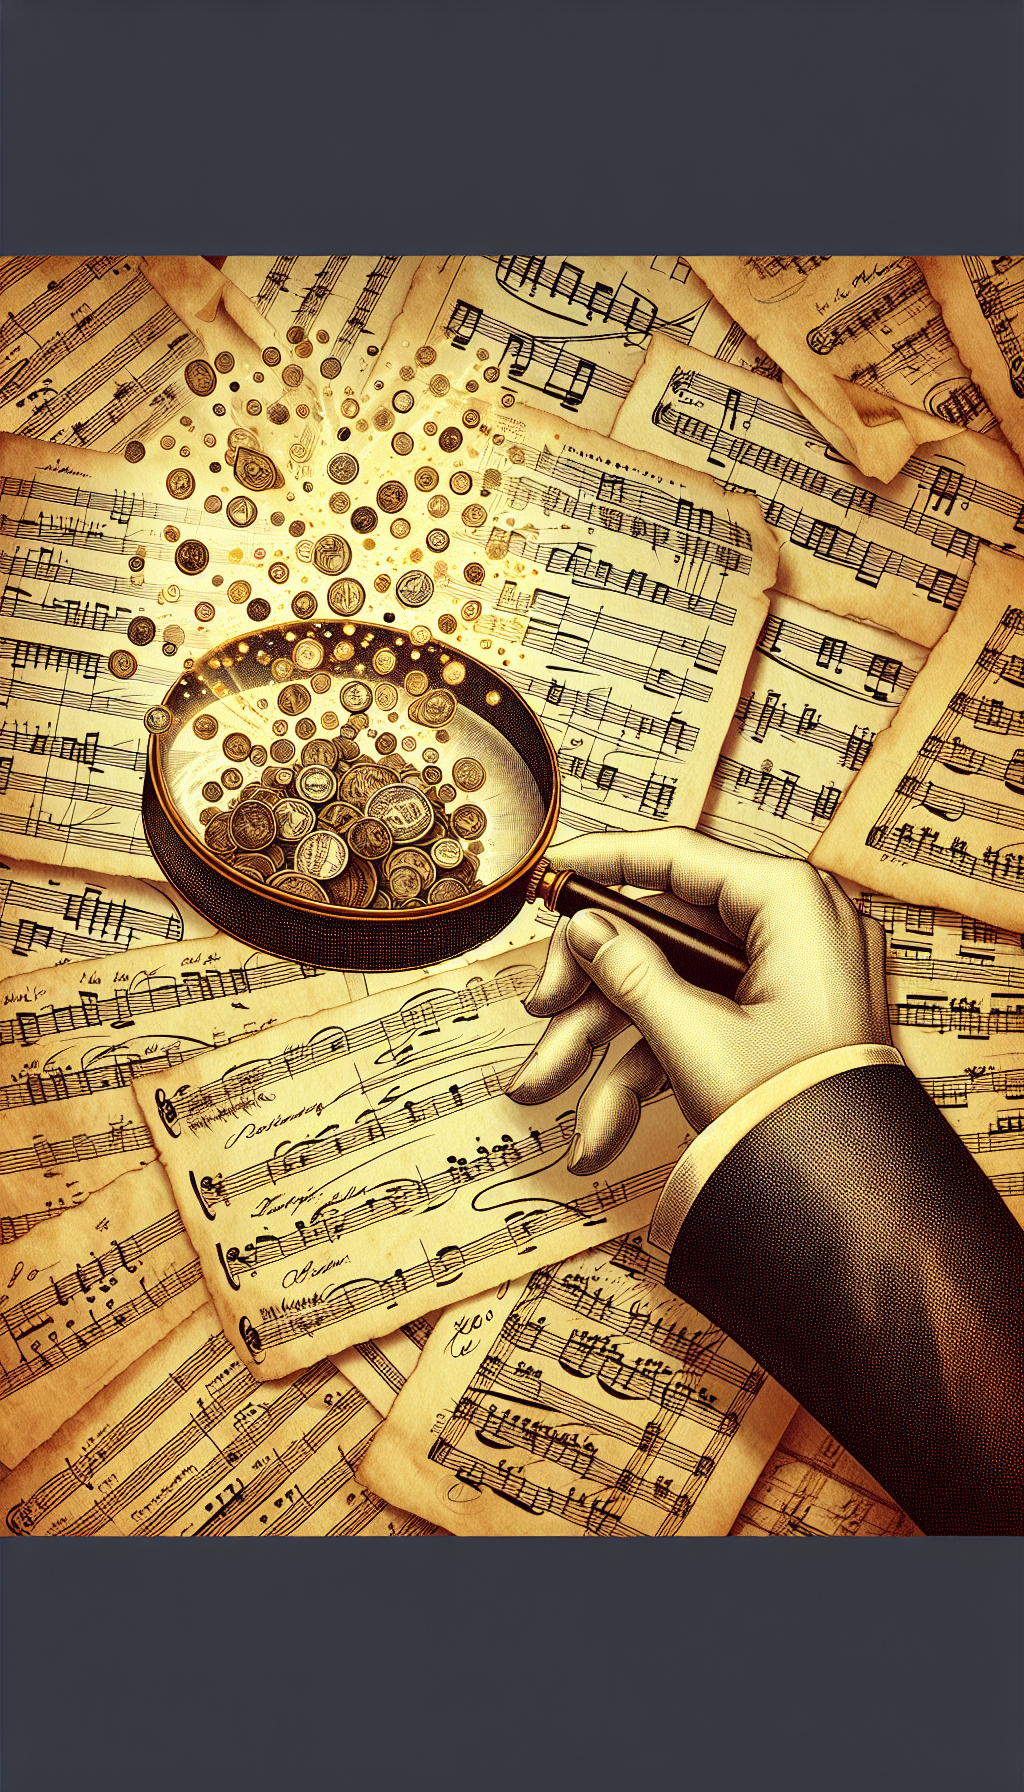 A vintage, sepia-toned illustration displaying an elegant hand holding a magnifying glass over scattered sheet music sheets. The sheets transition from sepia to vibrant hues as they pass under the glass, highlighting famous composers' signatures and indicating their increased value. Various musical notes float upward, morphing into miniature gold coins, symbolizing the sheet music's growing monetary worth affected by popularity and artist influence.